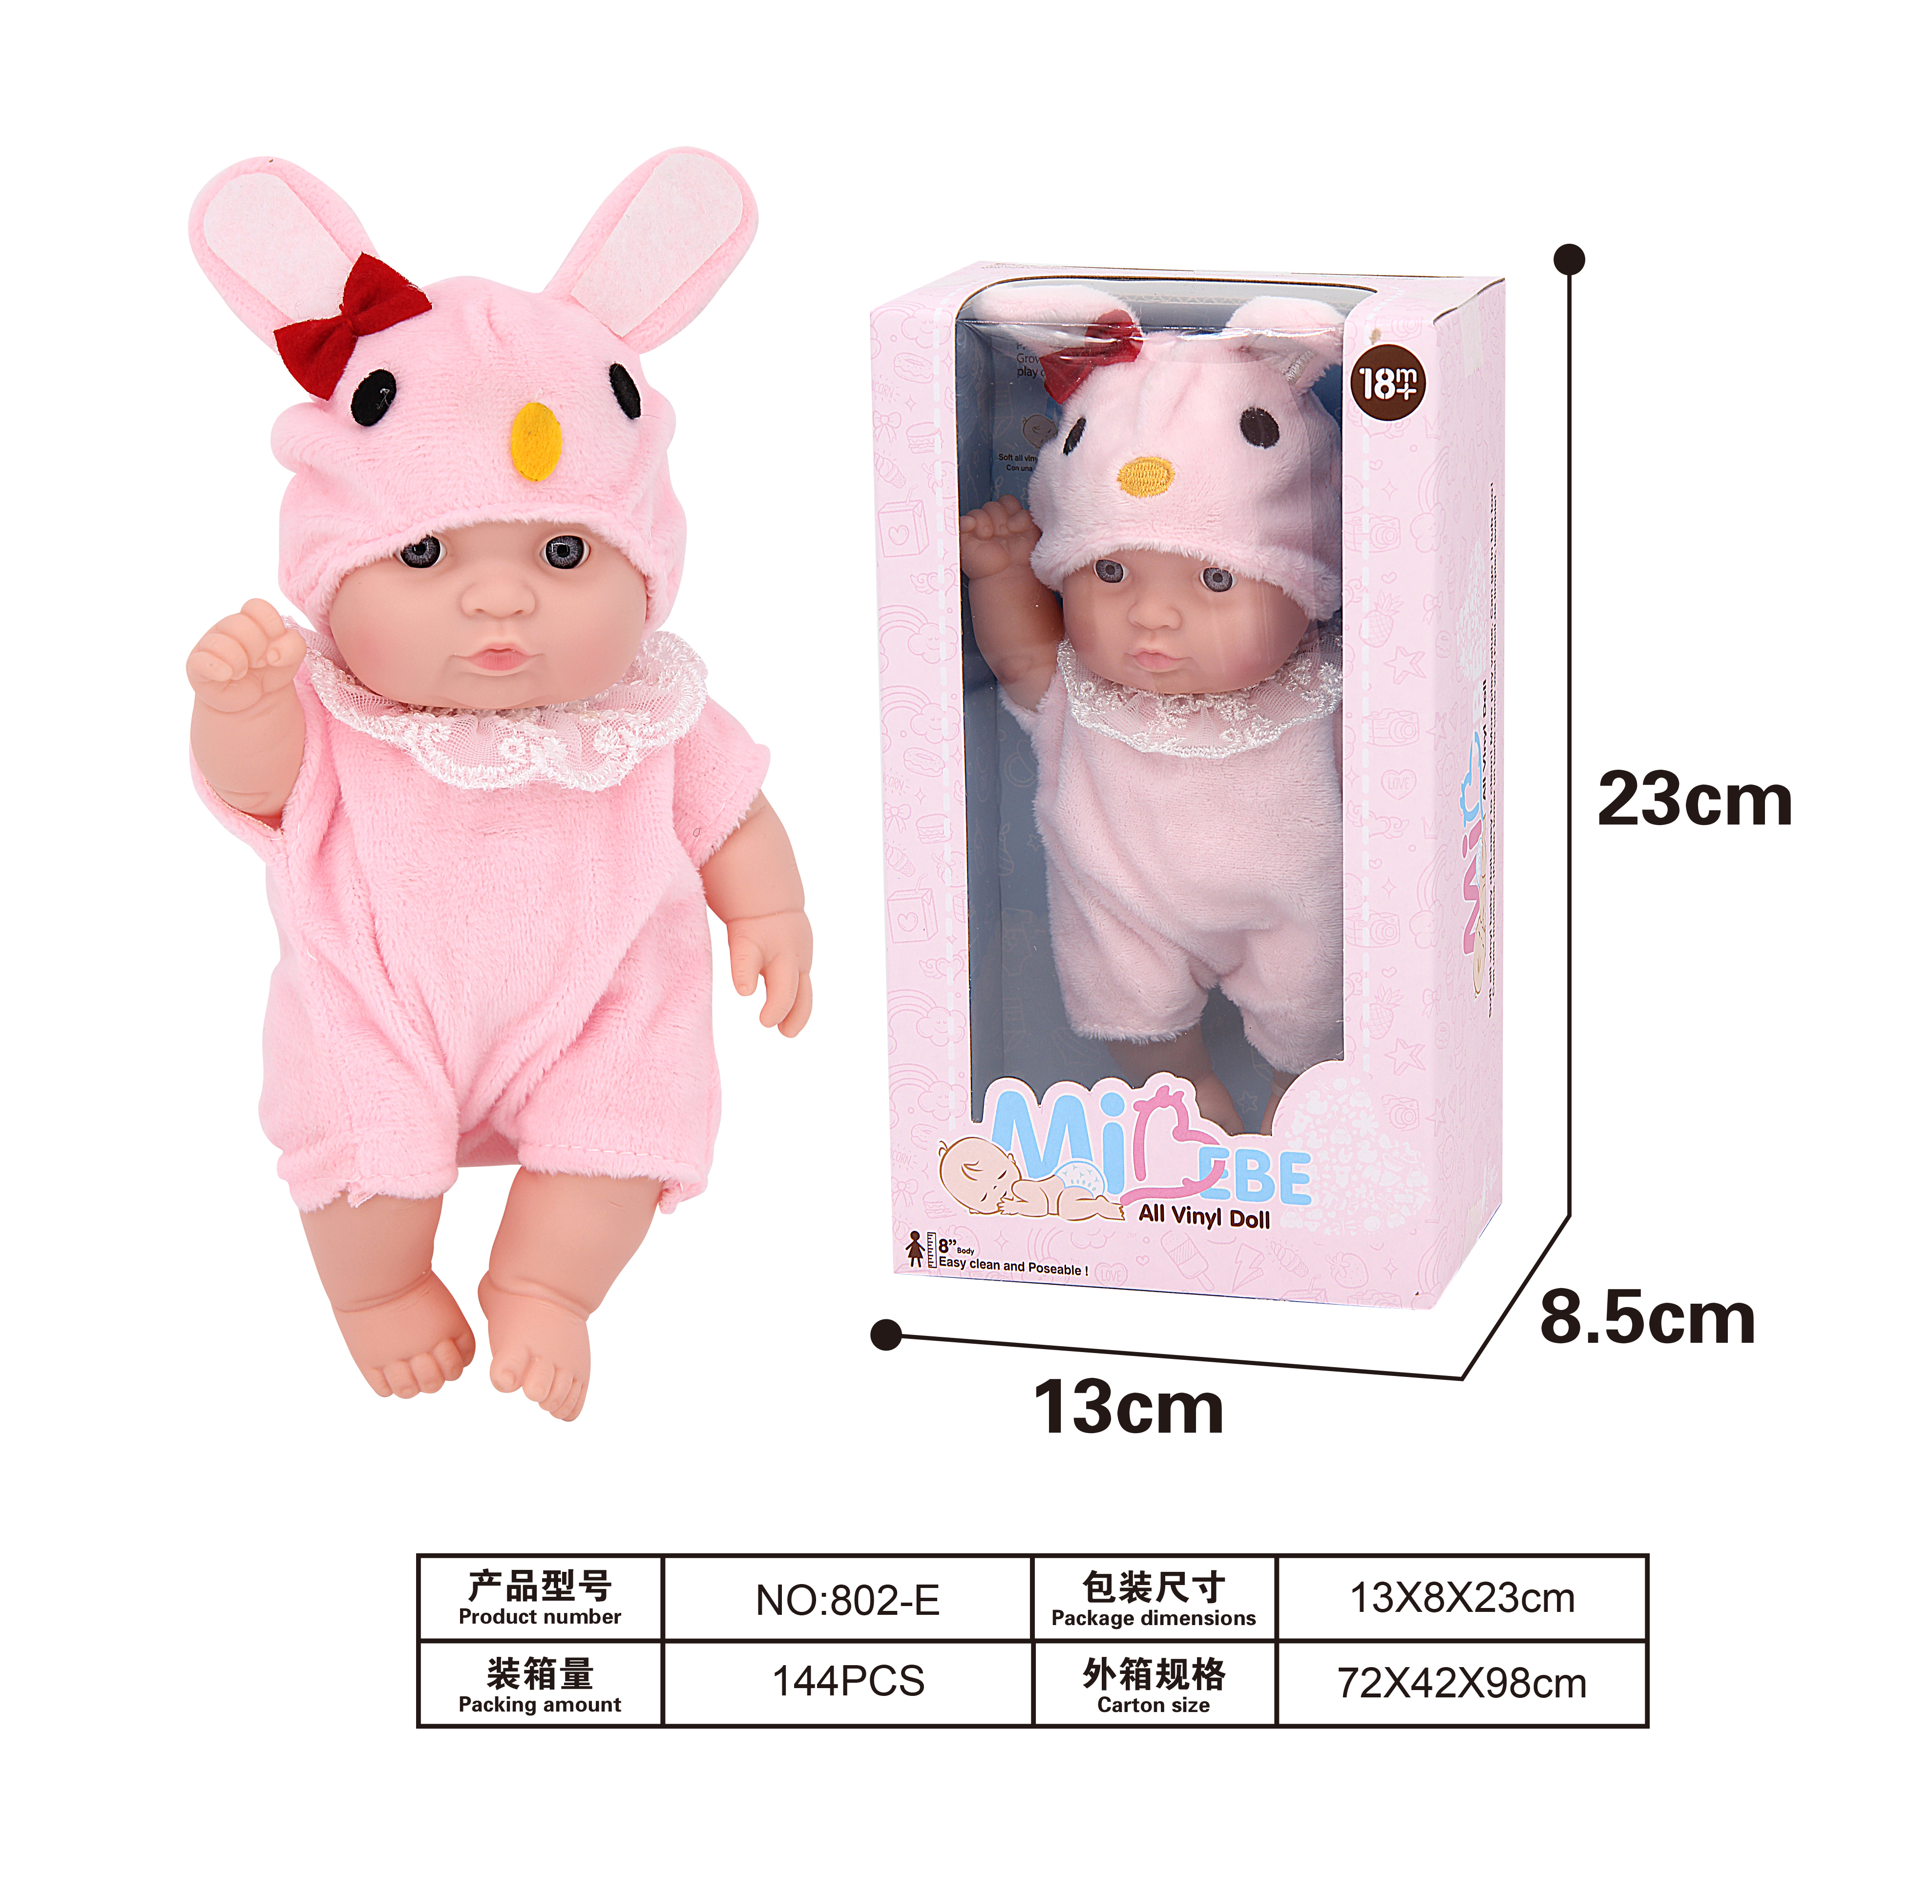 802-EHigh quality baby doll for girls and kids